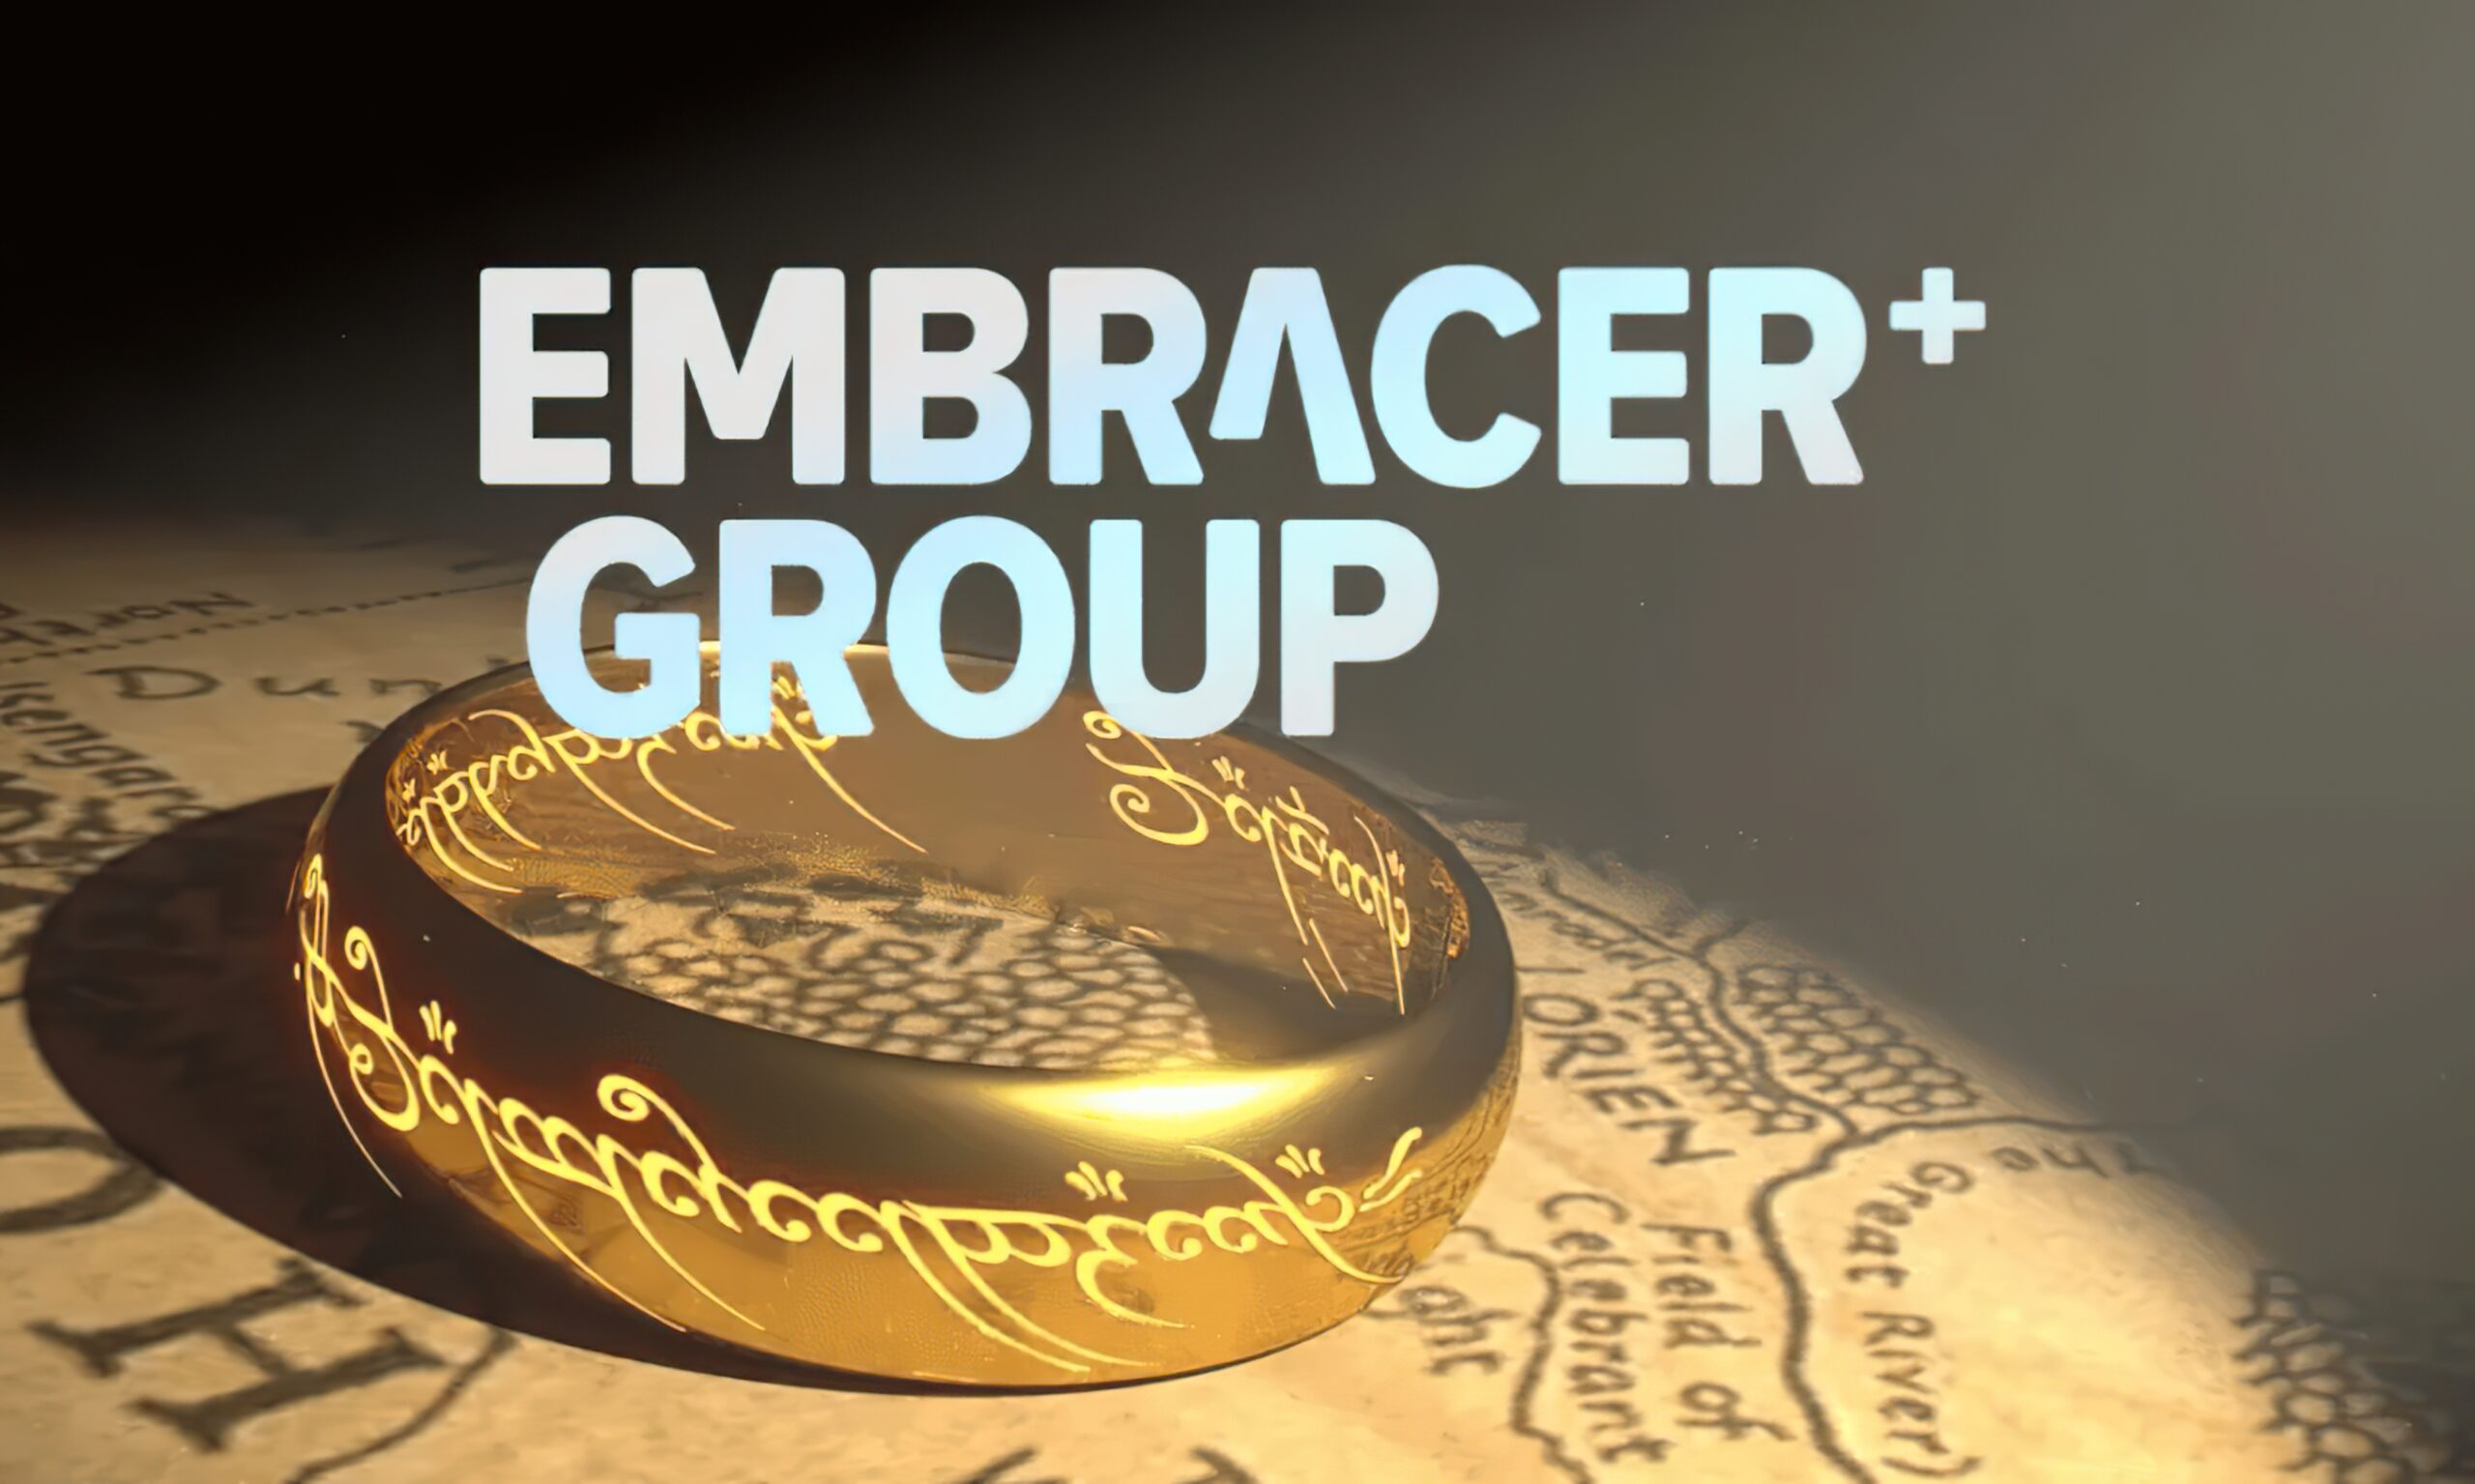 Embracer has bought the rights to The Lord of the Rings